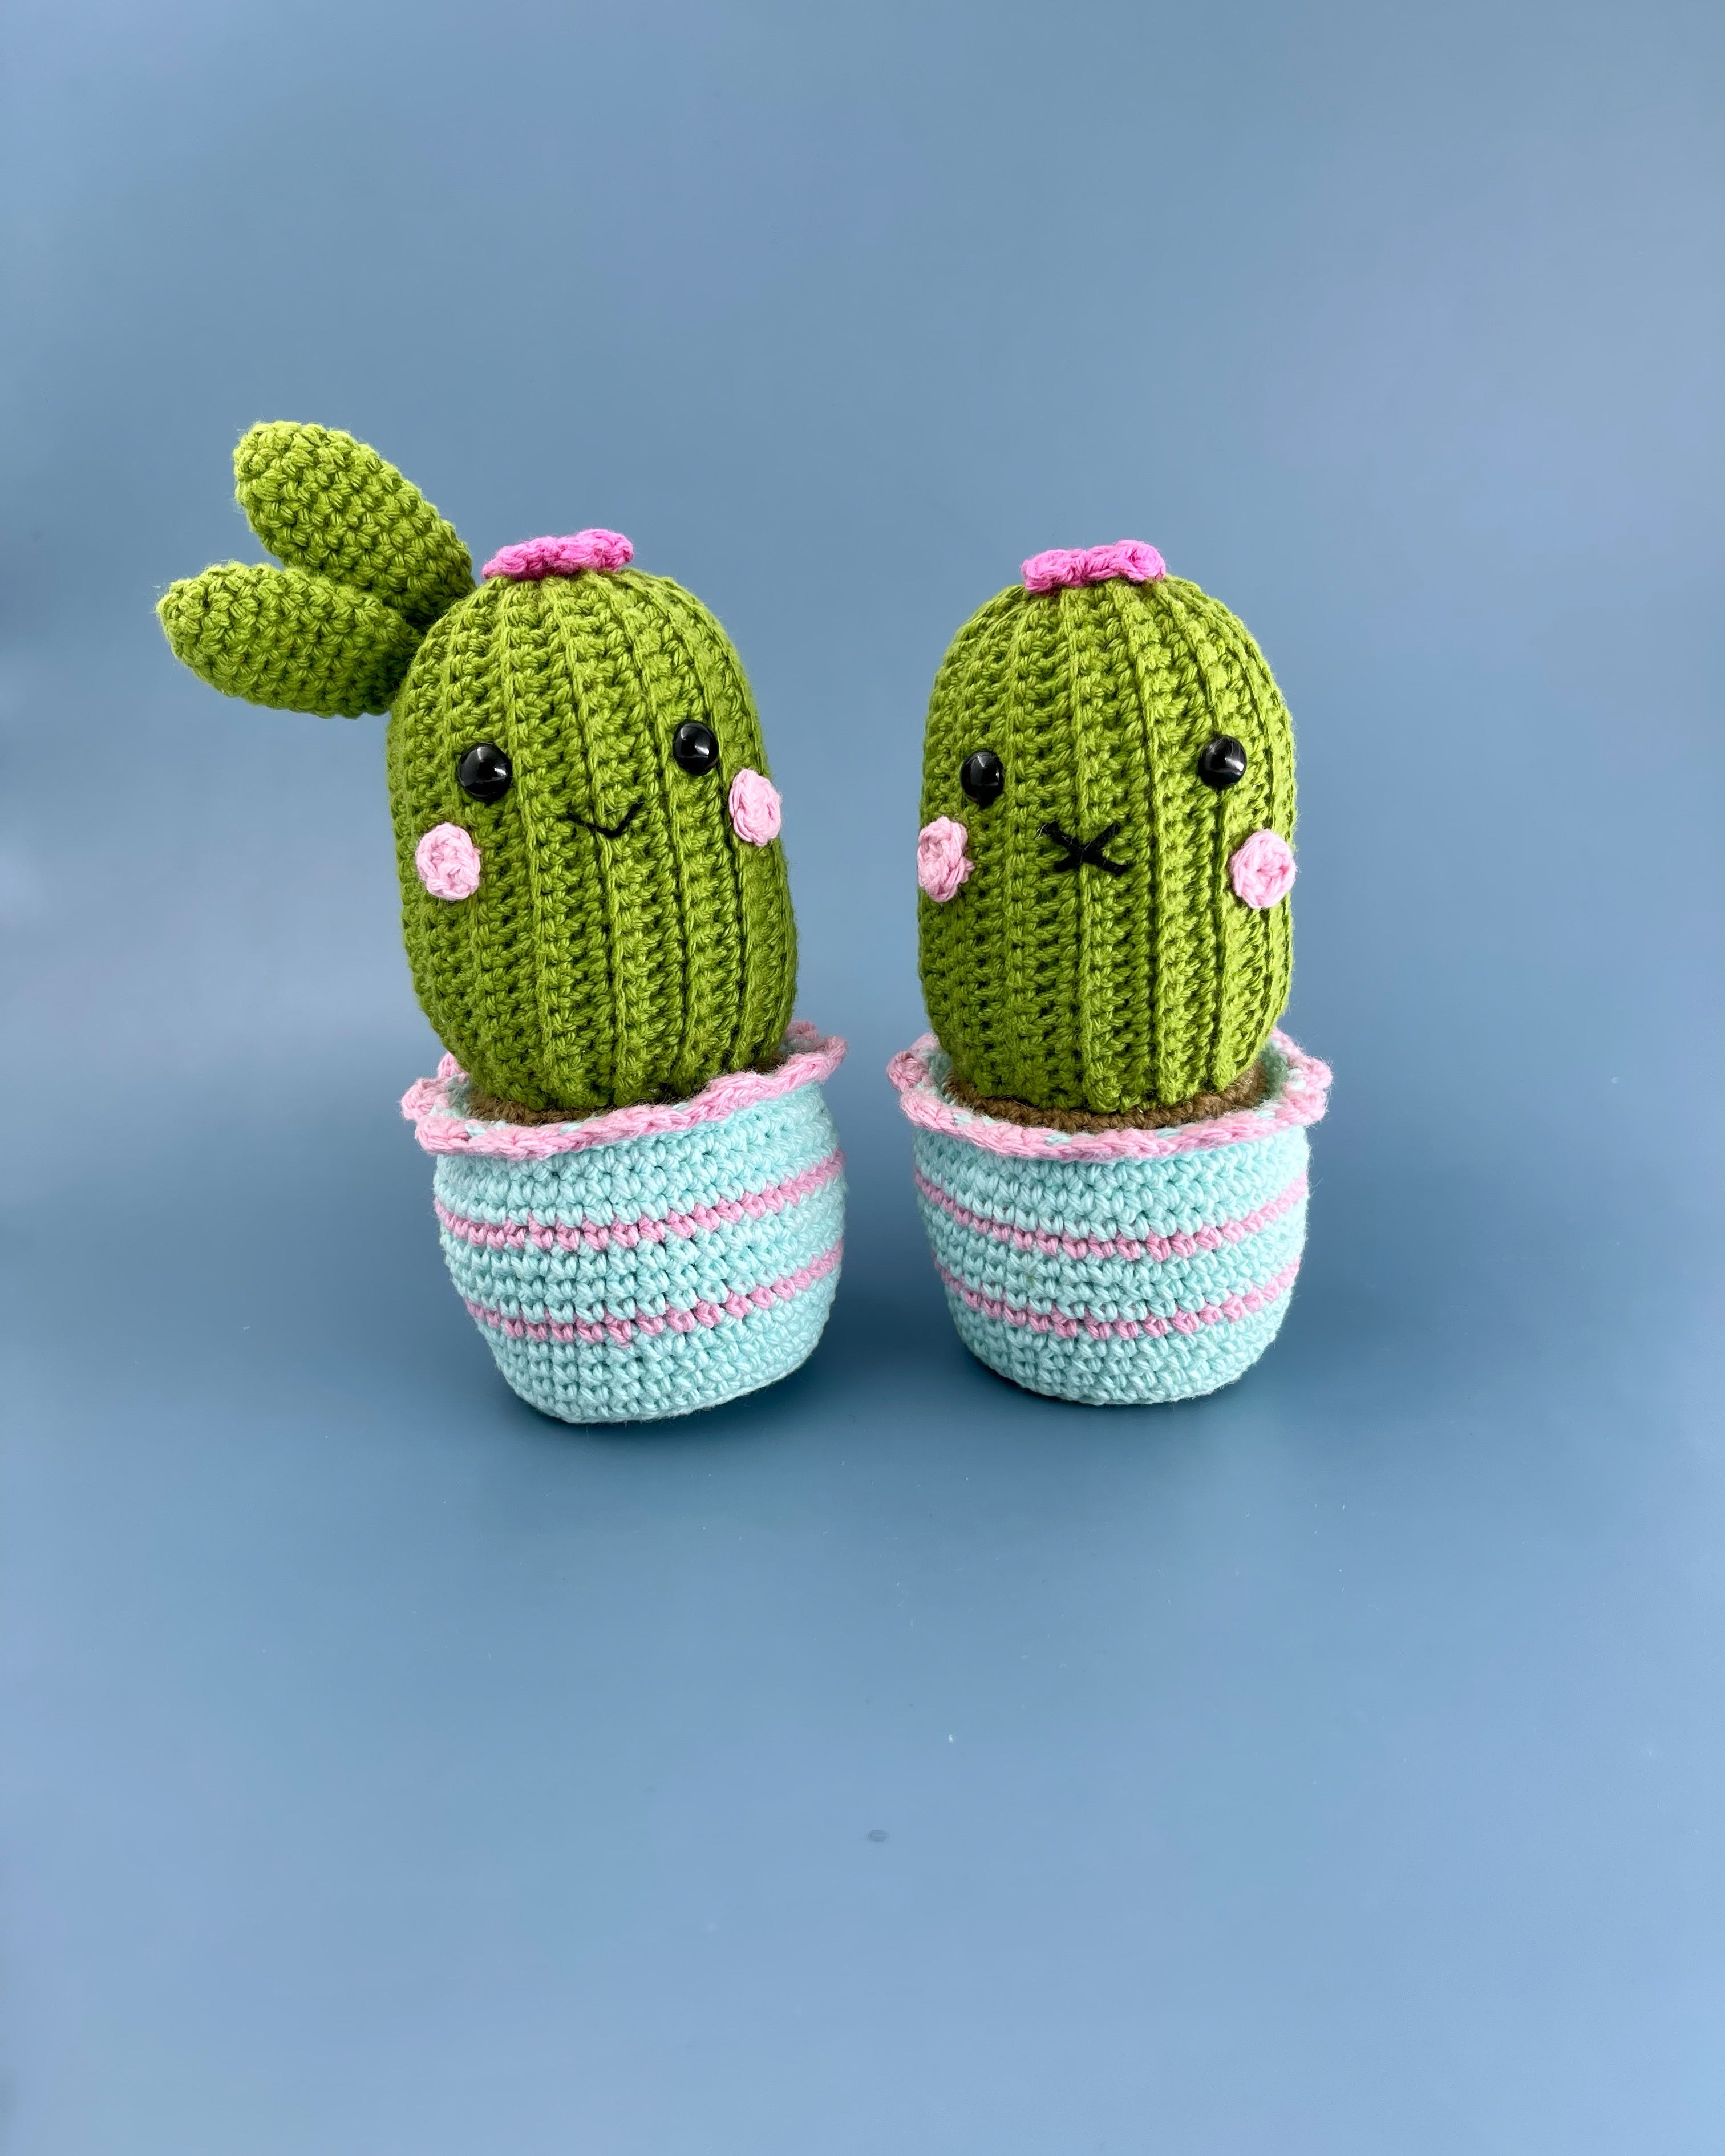 Mrs and Mr Cacti the cactus couple